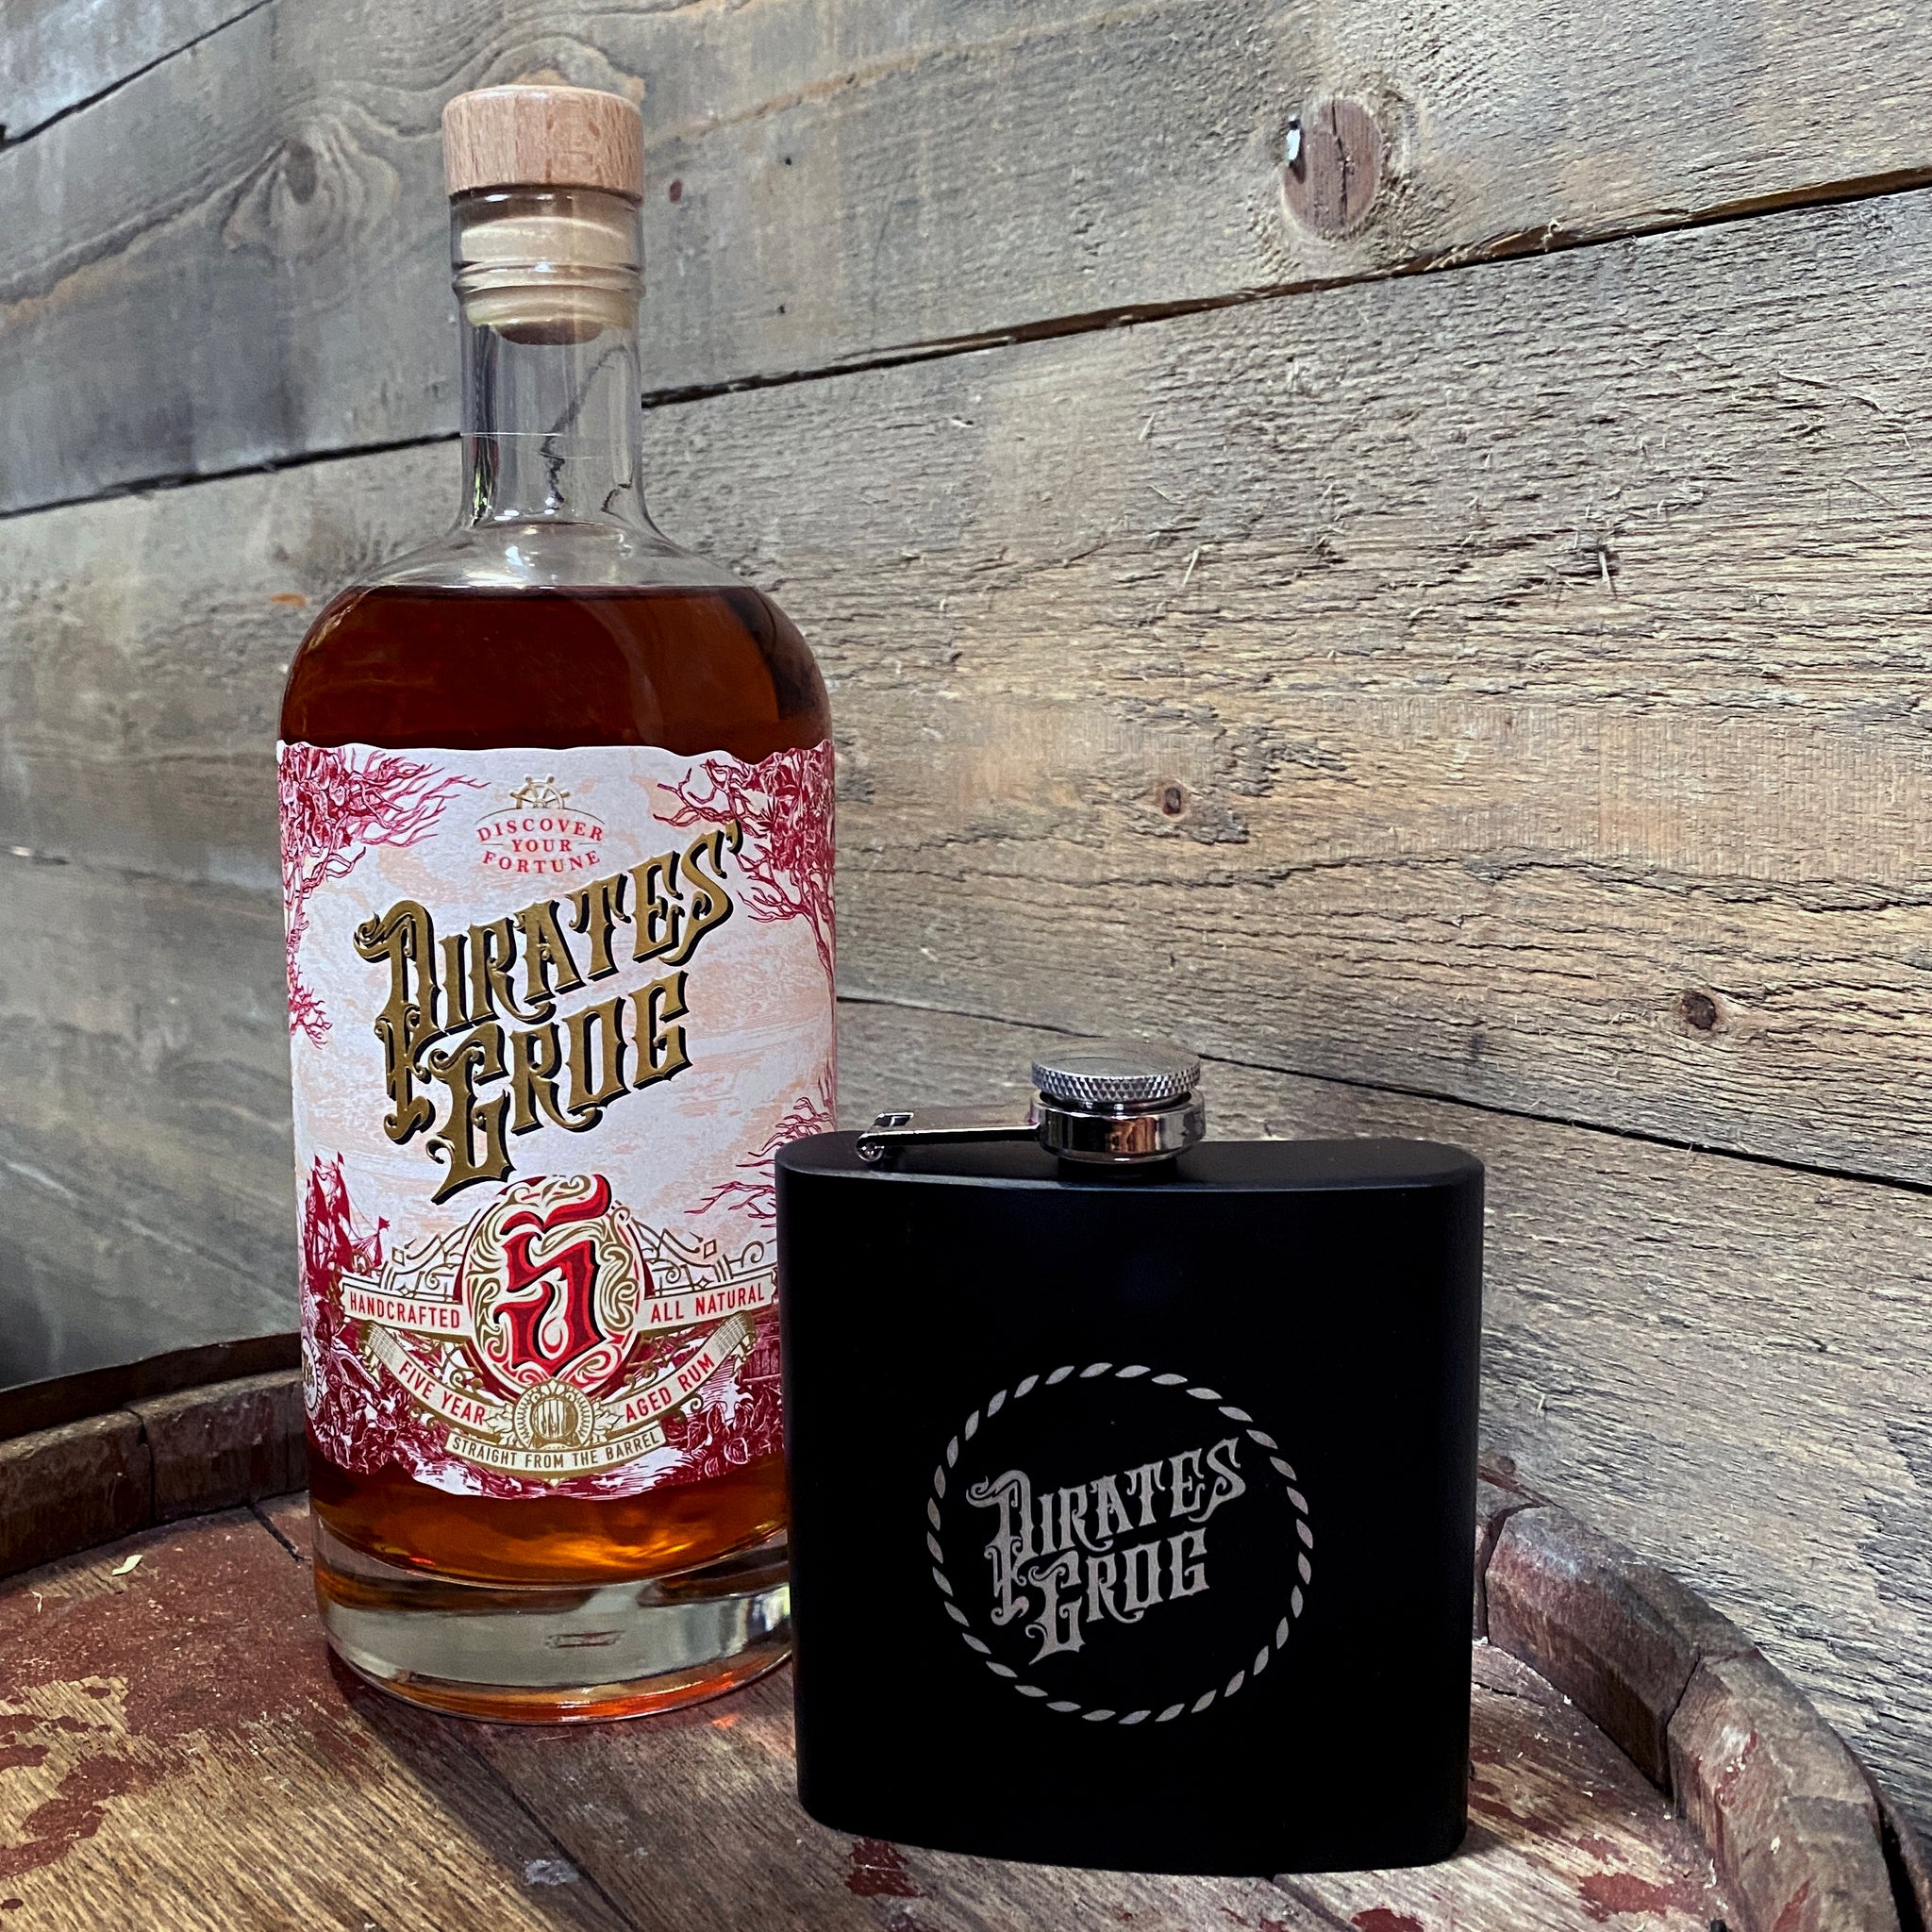 Pirate's Grog - Hip Flask And Bottle of Rum